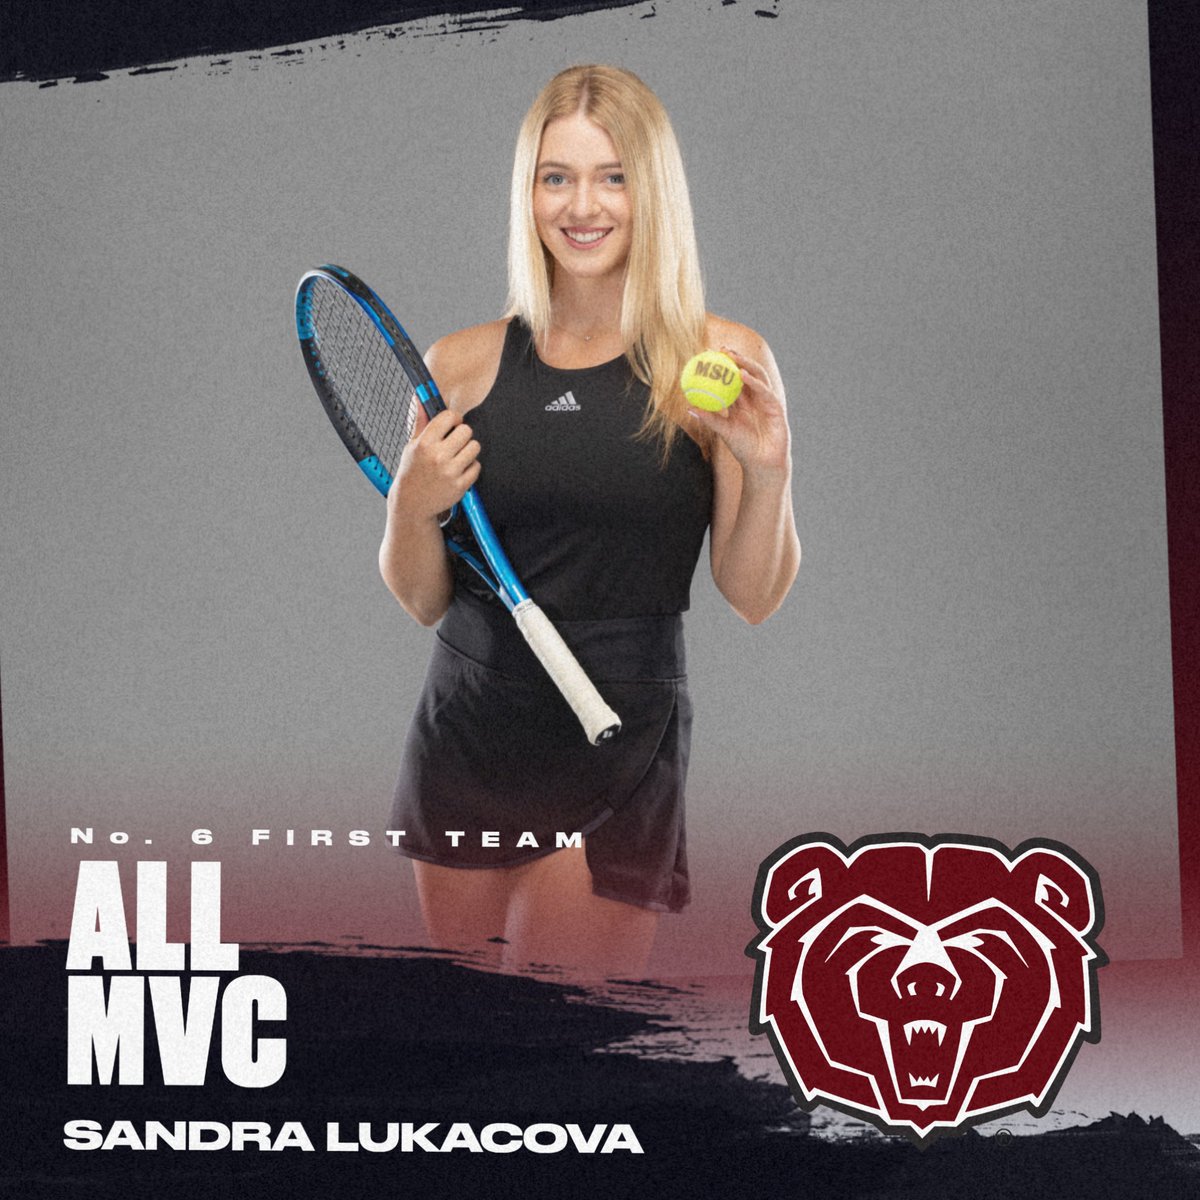 First team selection at No. 6 for Sandra! She ends the regular season with 13 singles wins, 7-1 in conference play, and a 6-match winning streak! 

#GoBears